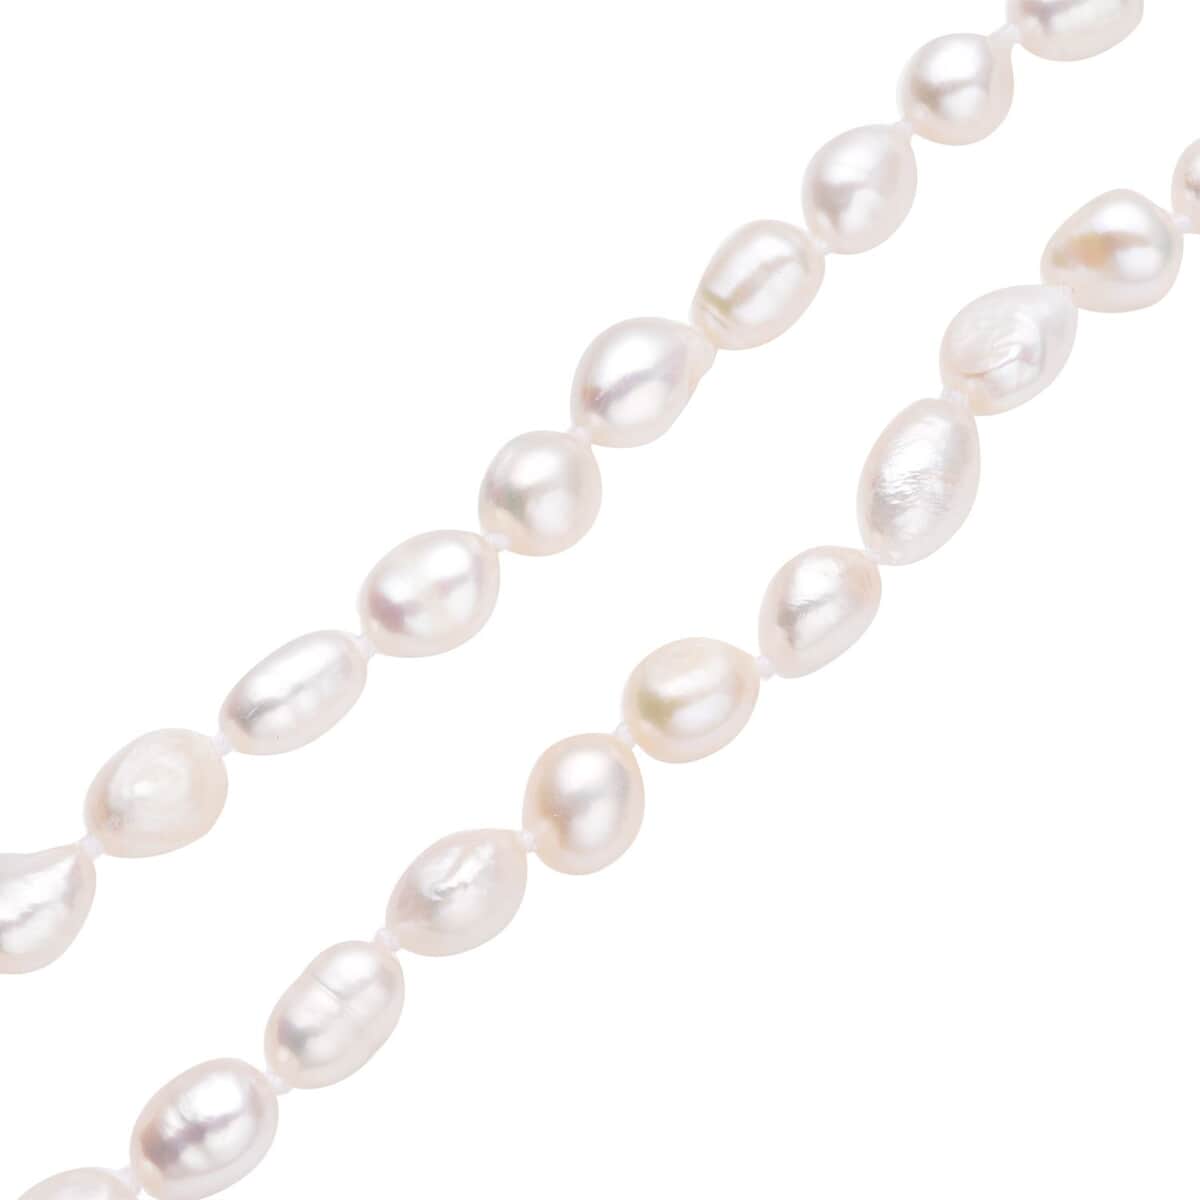 Double Shine White Freshwater Pearl 6-8mm Necklace (18 Inches) in Stainless Steel , Tarnish-Free, Waterproof, Sweat Proof Jewelry image number 3